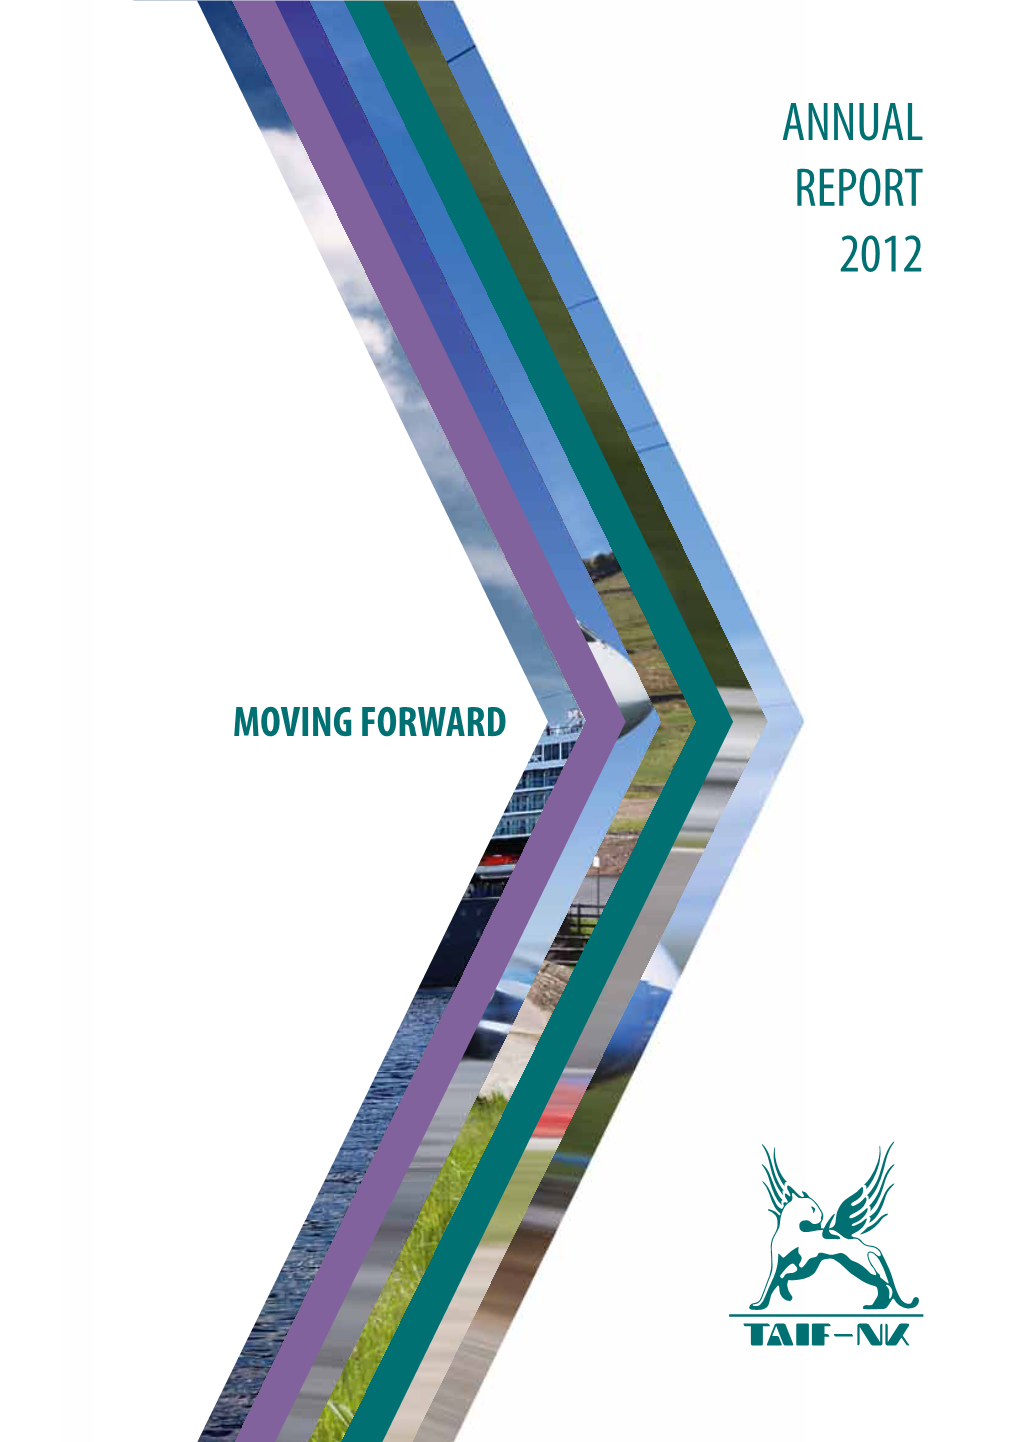 ANNUAL REPORT 2012 Moving Forward